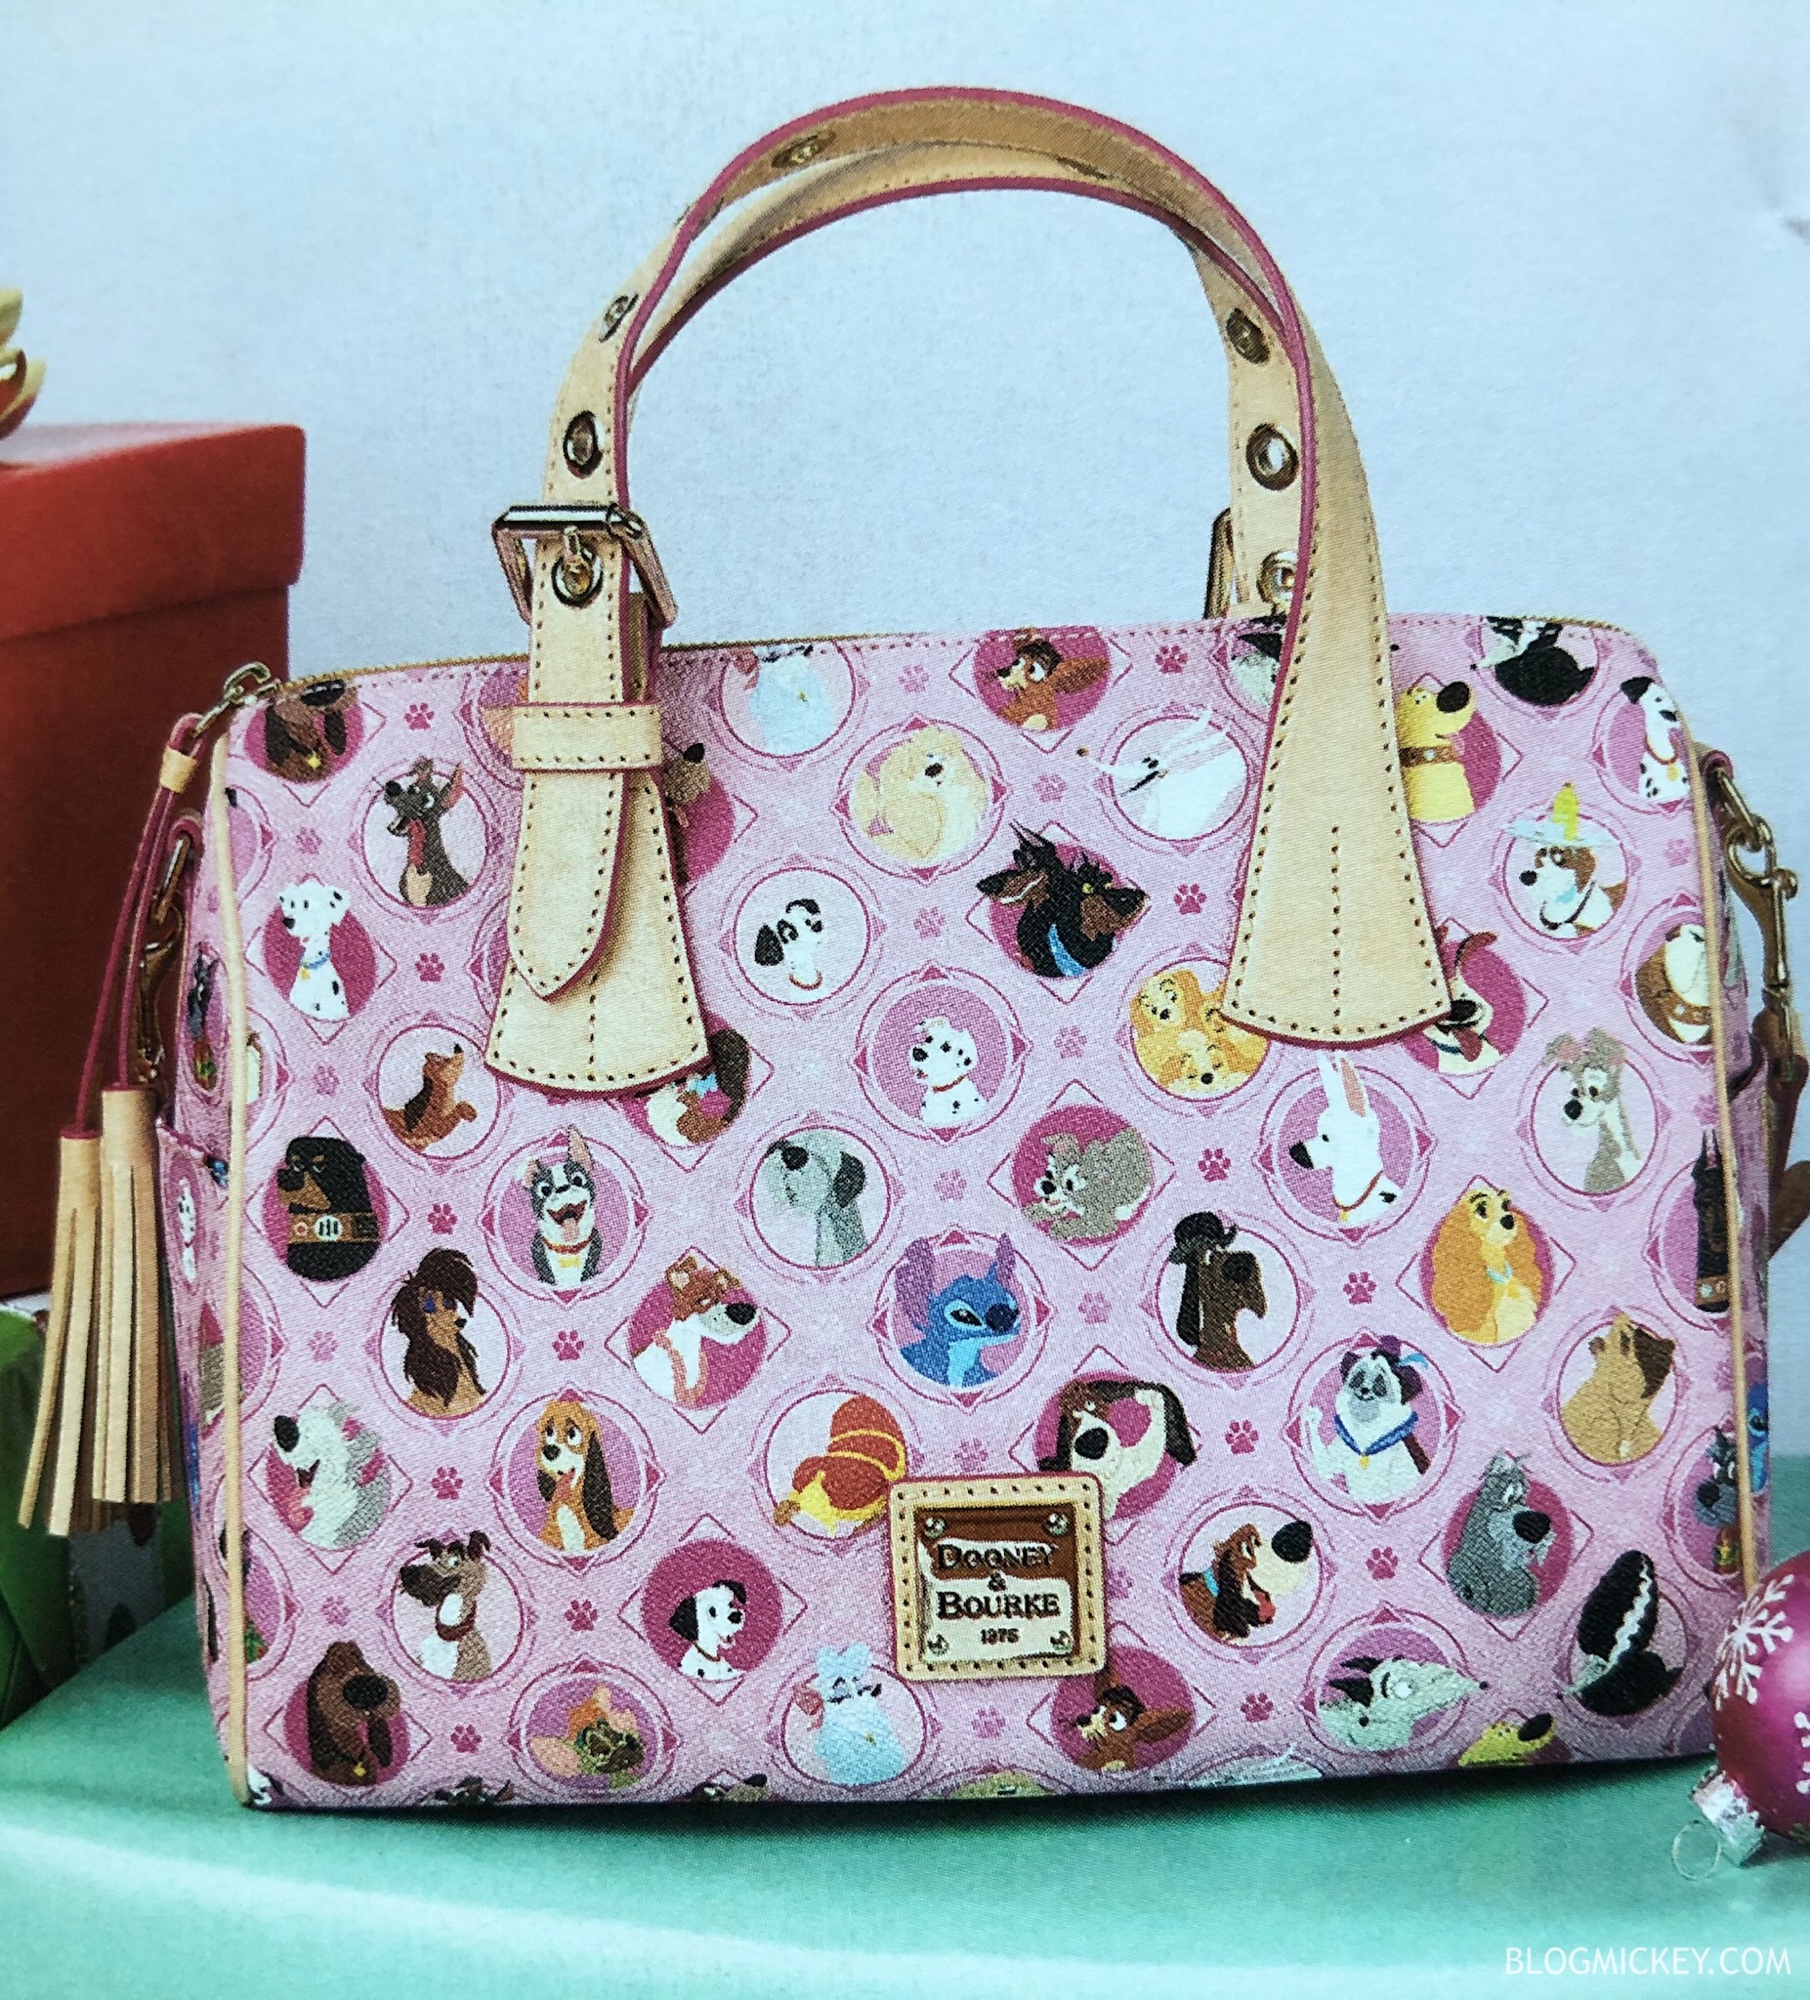 New Dooney and Bourke Handbags Featuring Disney Dogs to be Released Soon